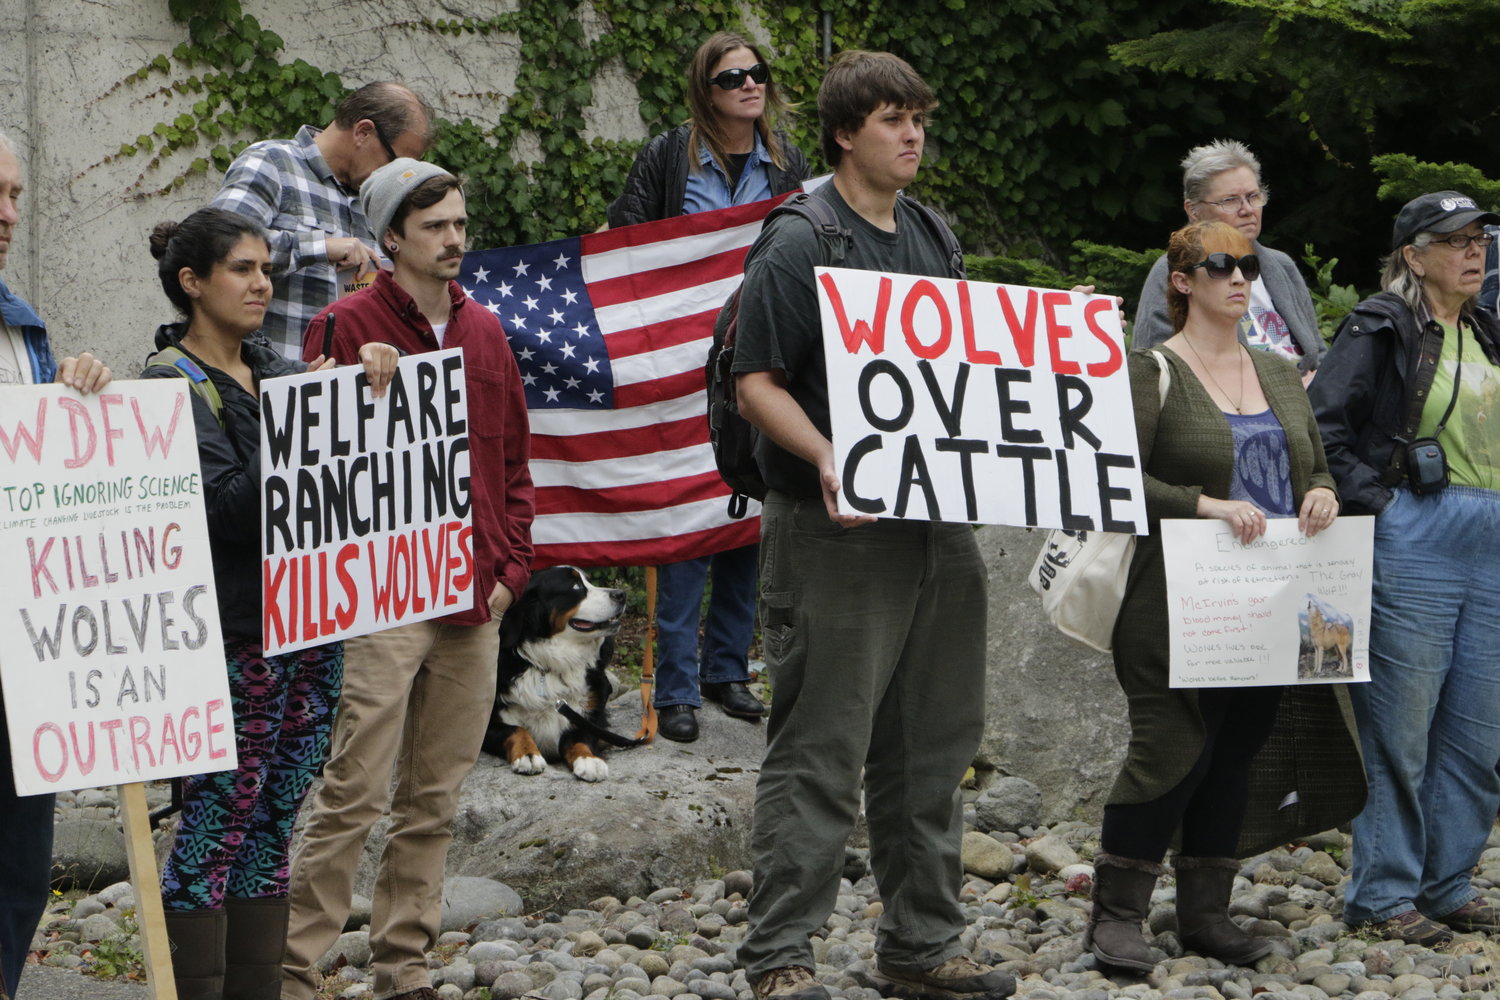 Opponents of the state's decision to eradicate a wolf pack in order to protect cattle protest outside of the Washington Department of Fish and Wildlife, Thursday, Sept. 1, 2016, in Olympia, Wash. 